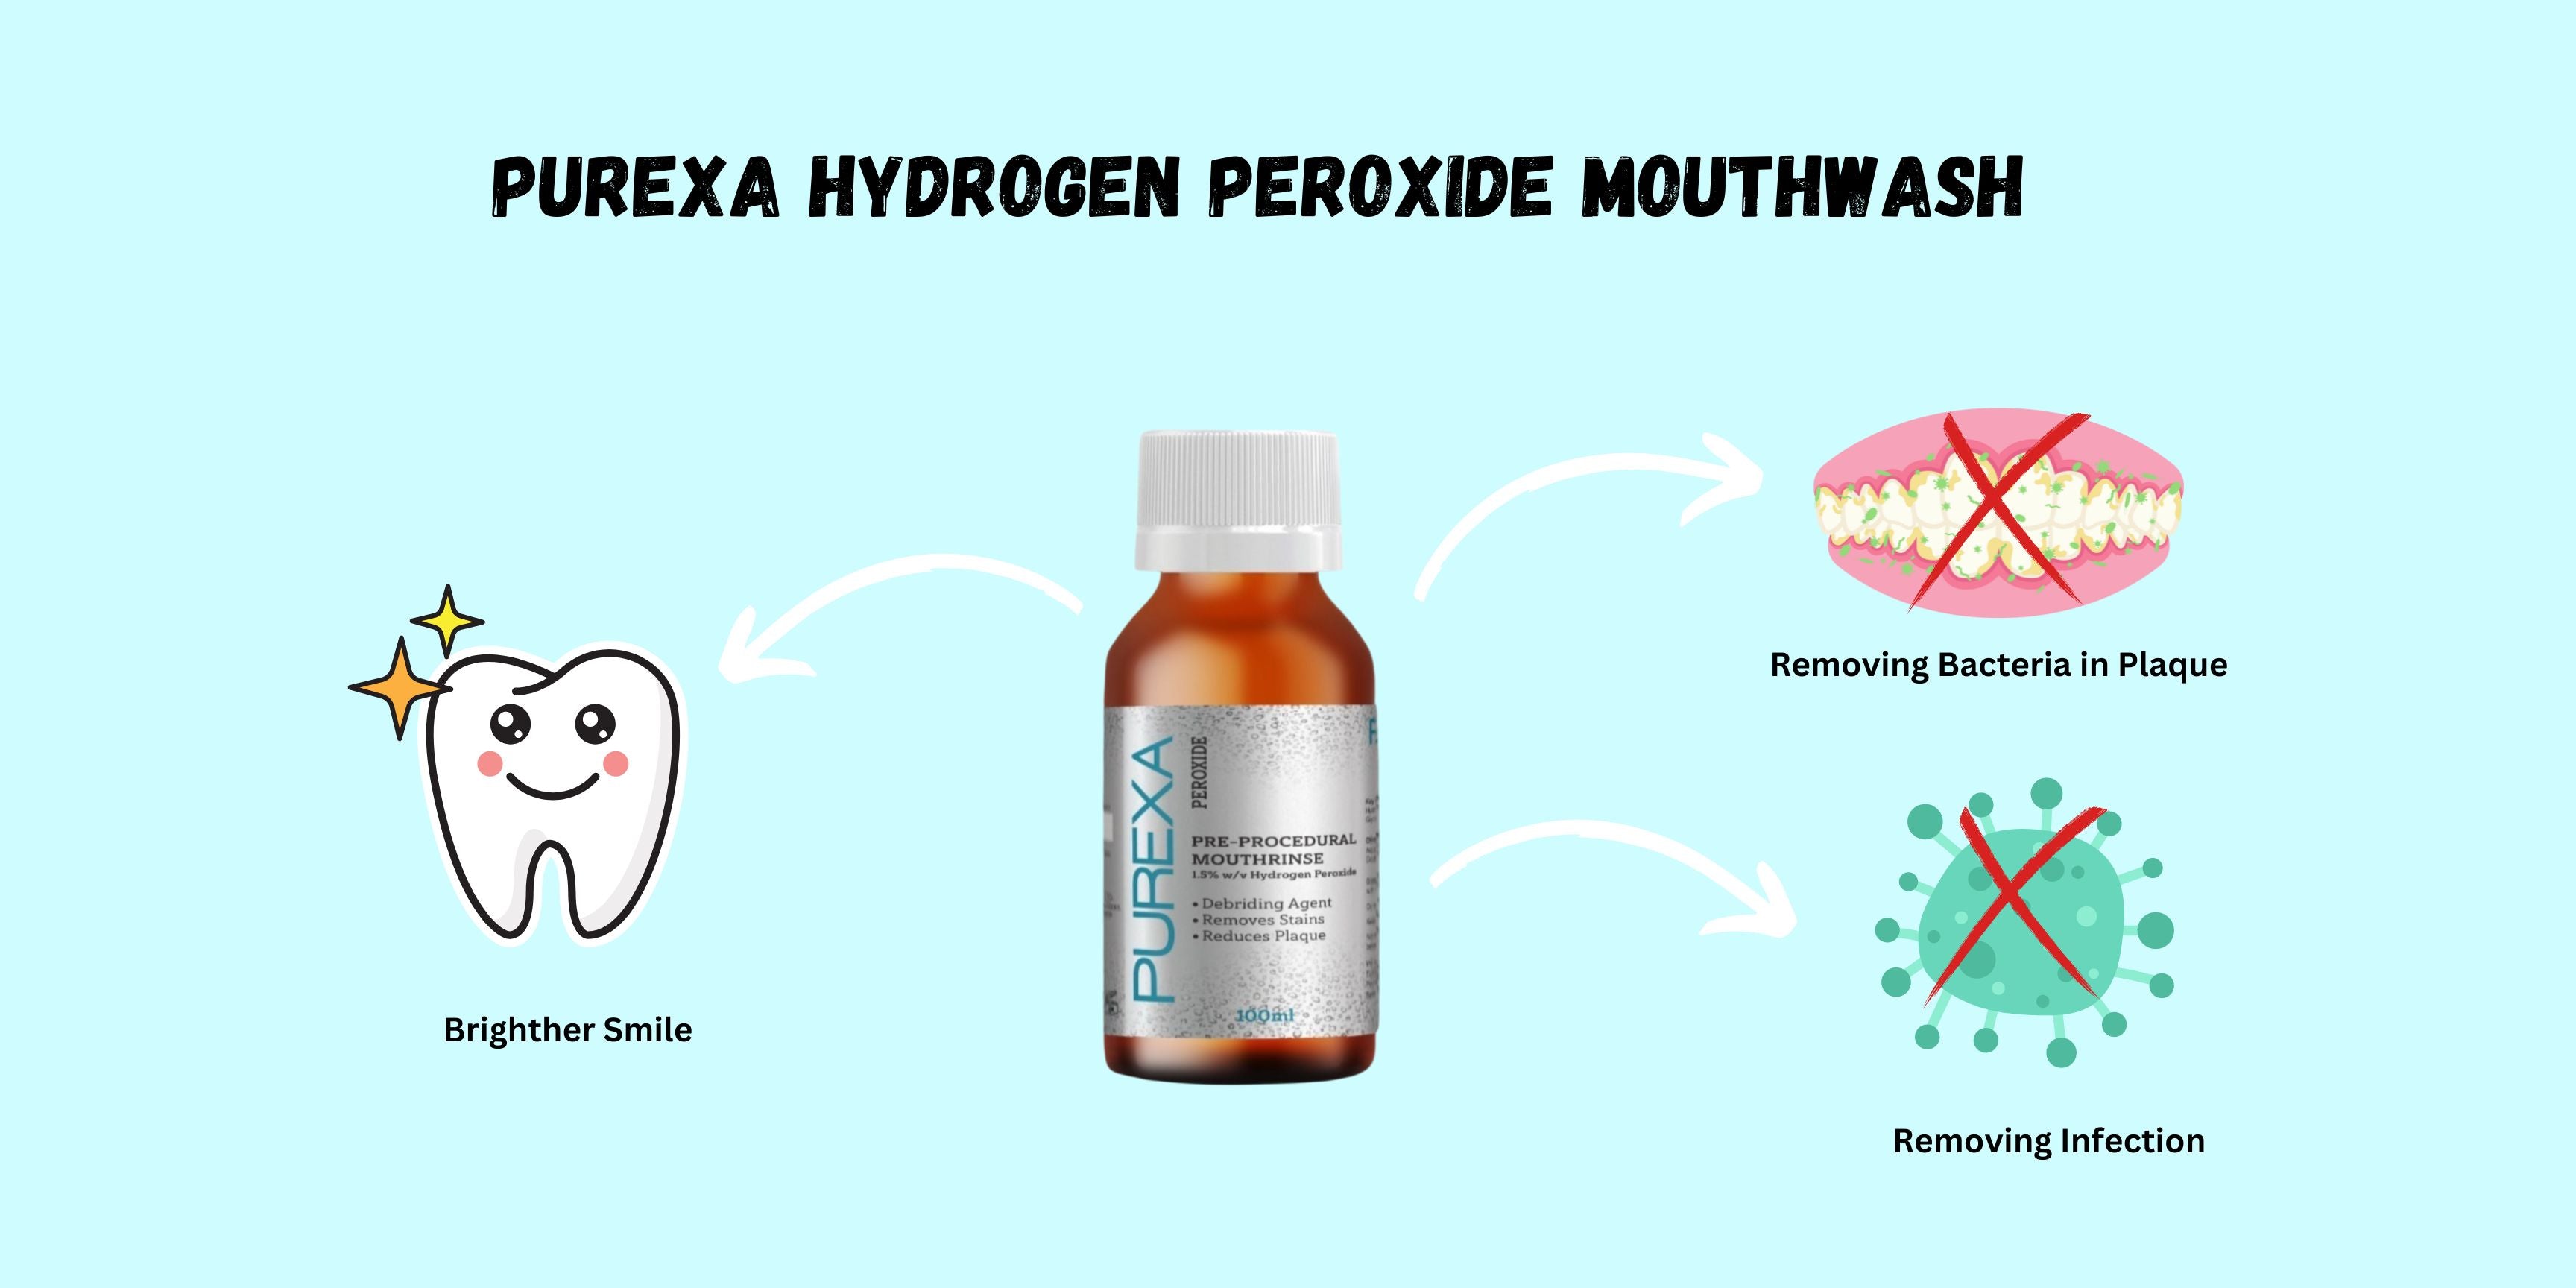 Why choose Purexa Hydrogen Peroxide Mouthwash